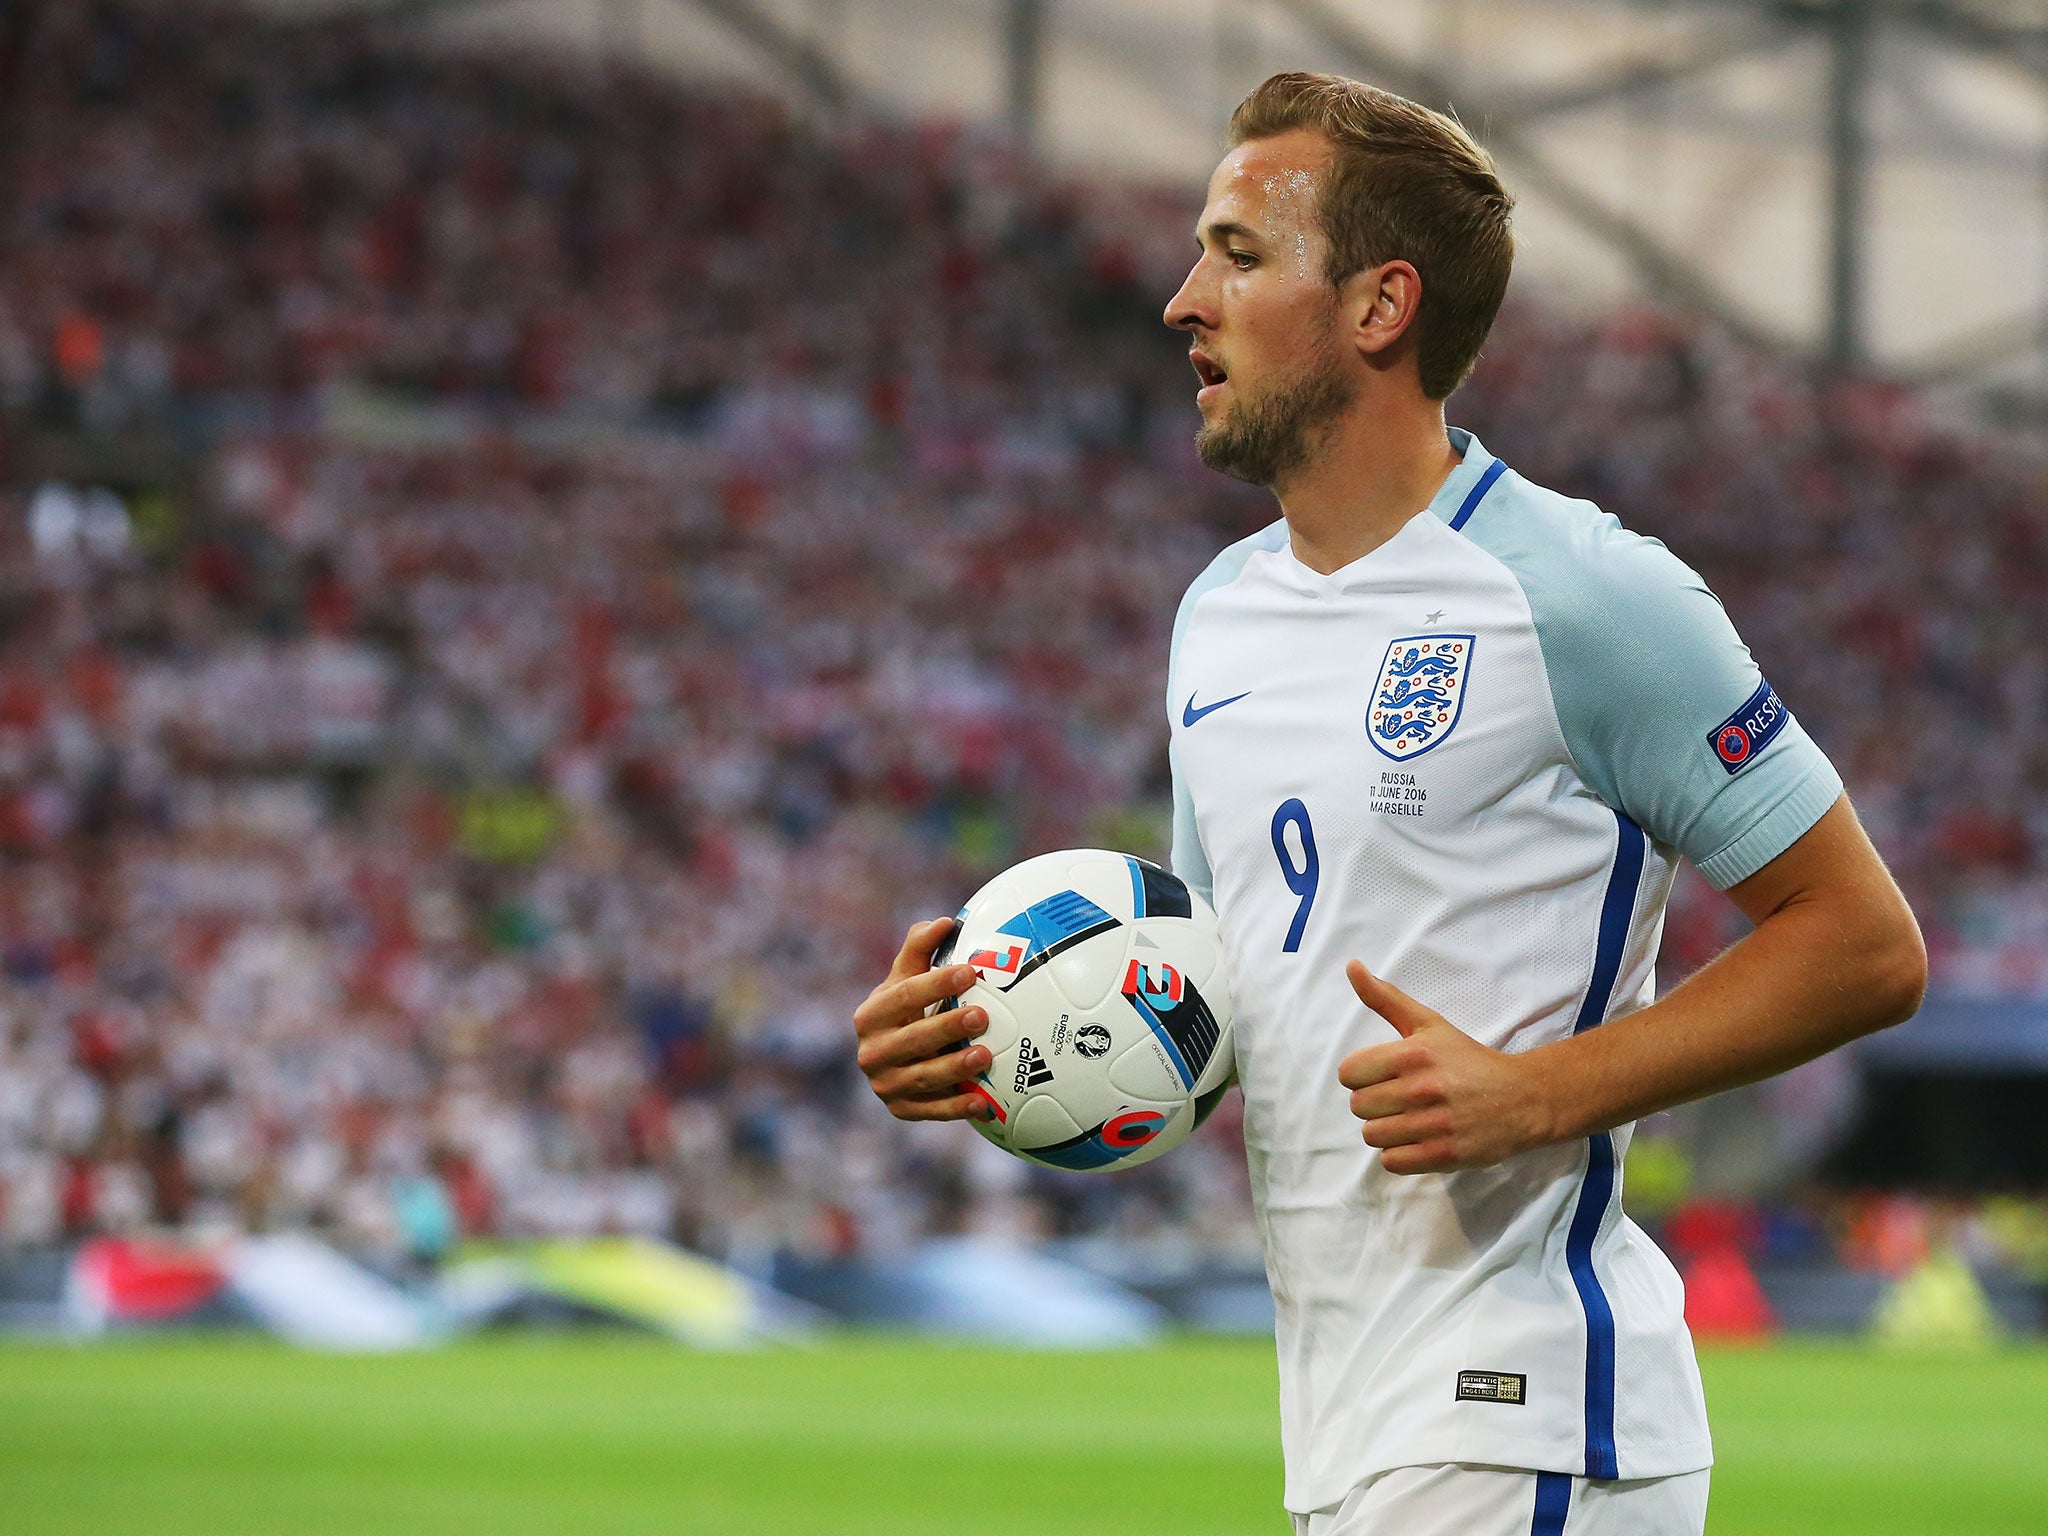 Harry Kane was handed the responsibility of taking England's corners during Euro 2016